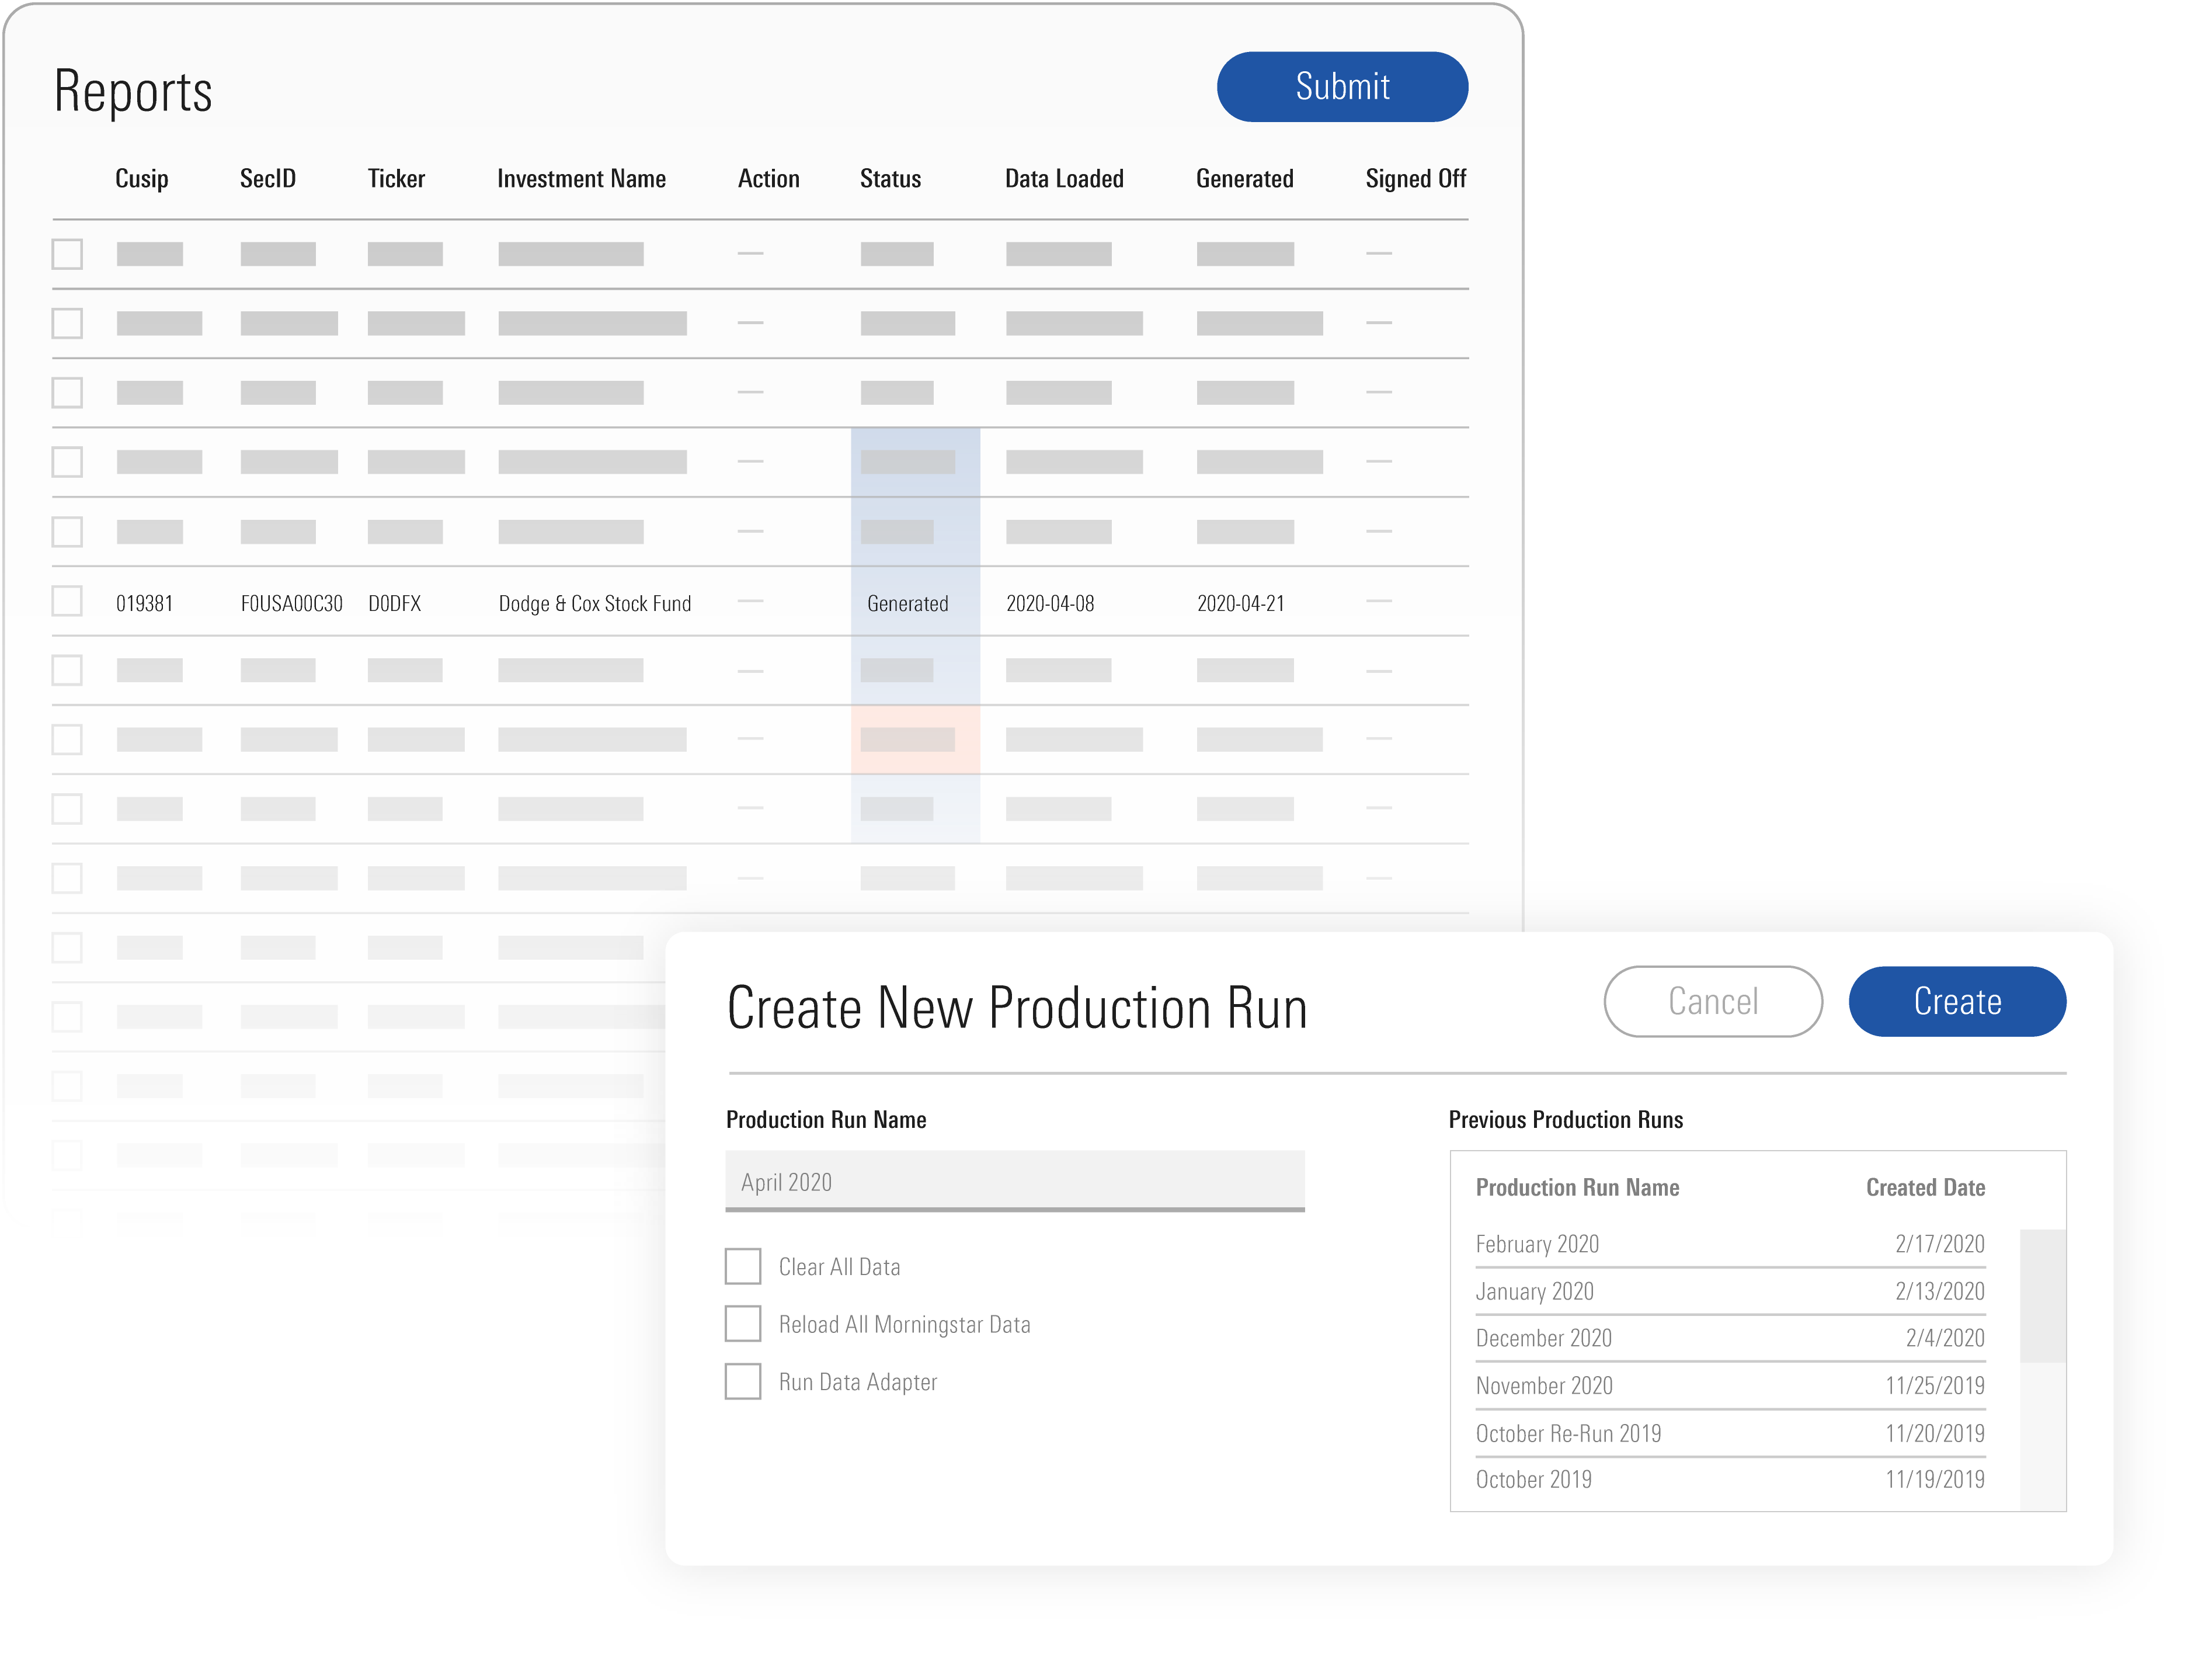 Illustration of reports dashboard and how to create a new production run.